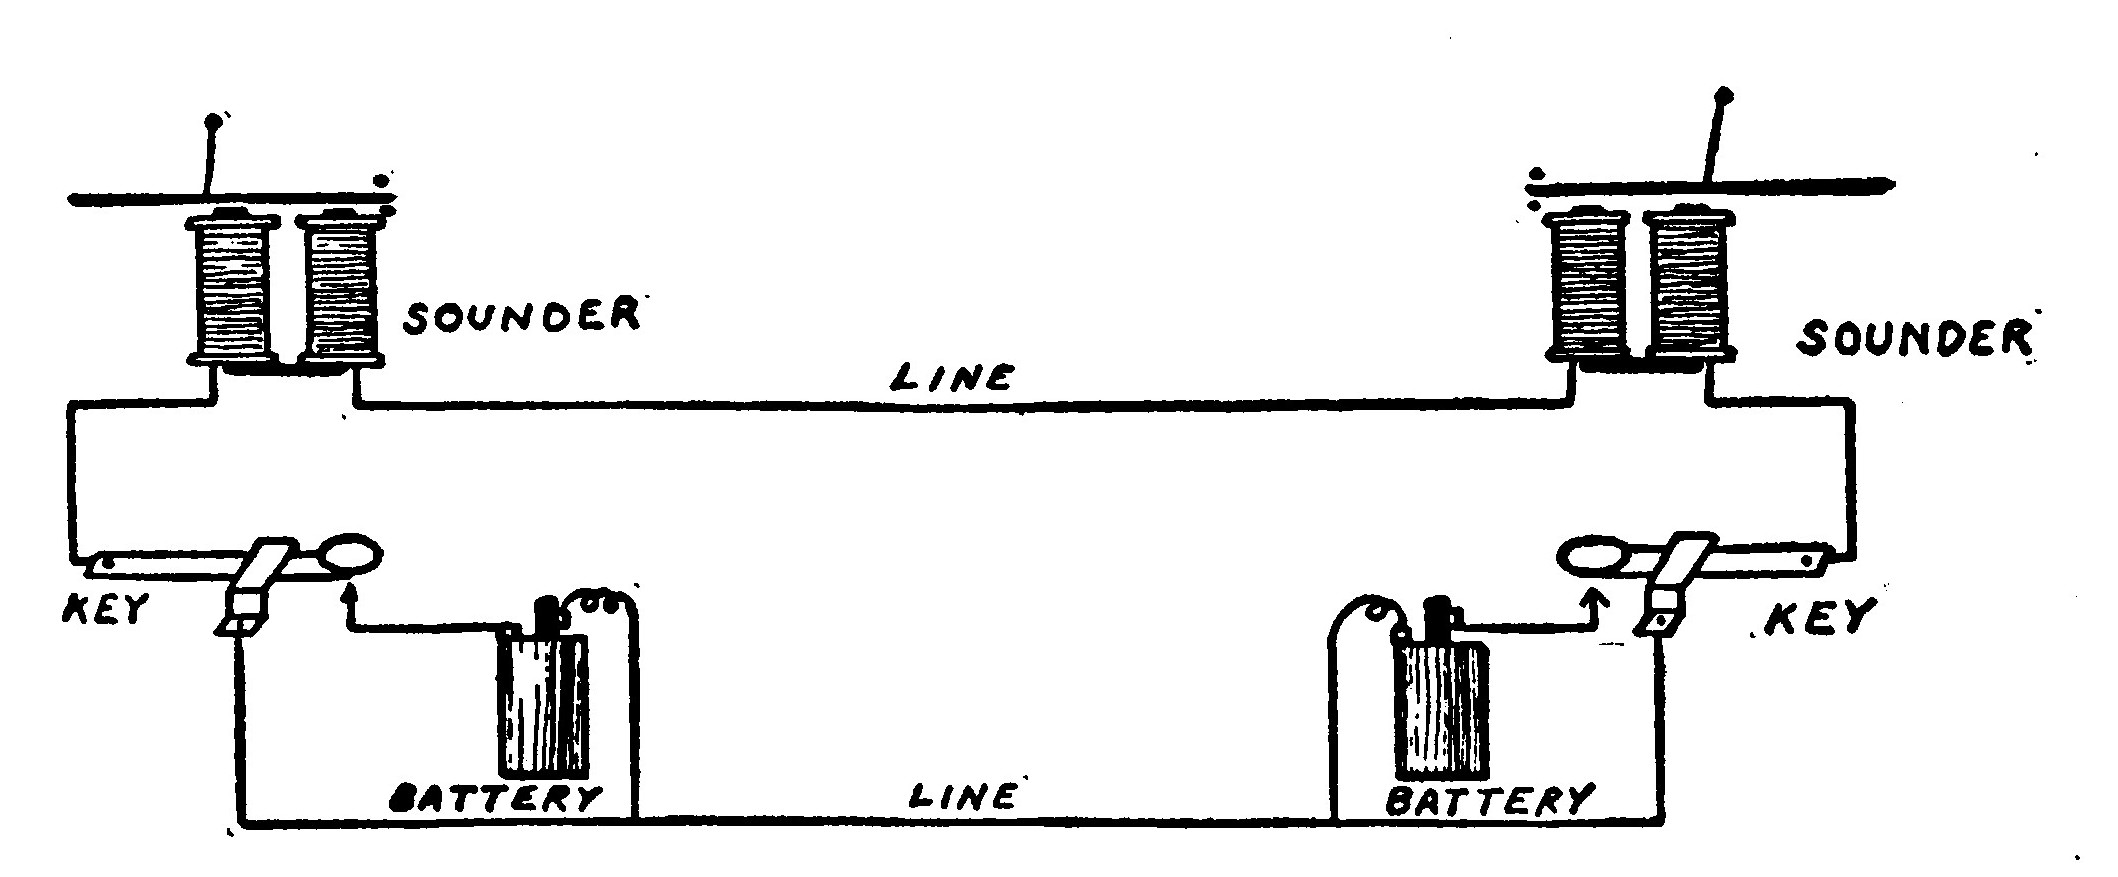 Fig. 134.—A Diagram showing how to connect two Simple Telegraph Stations.